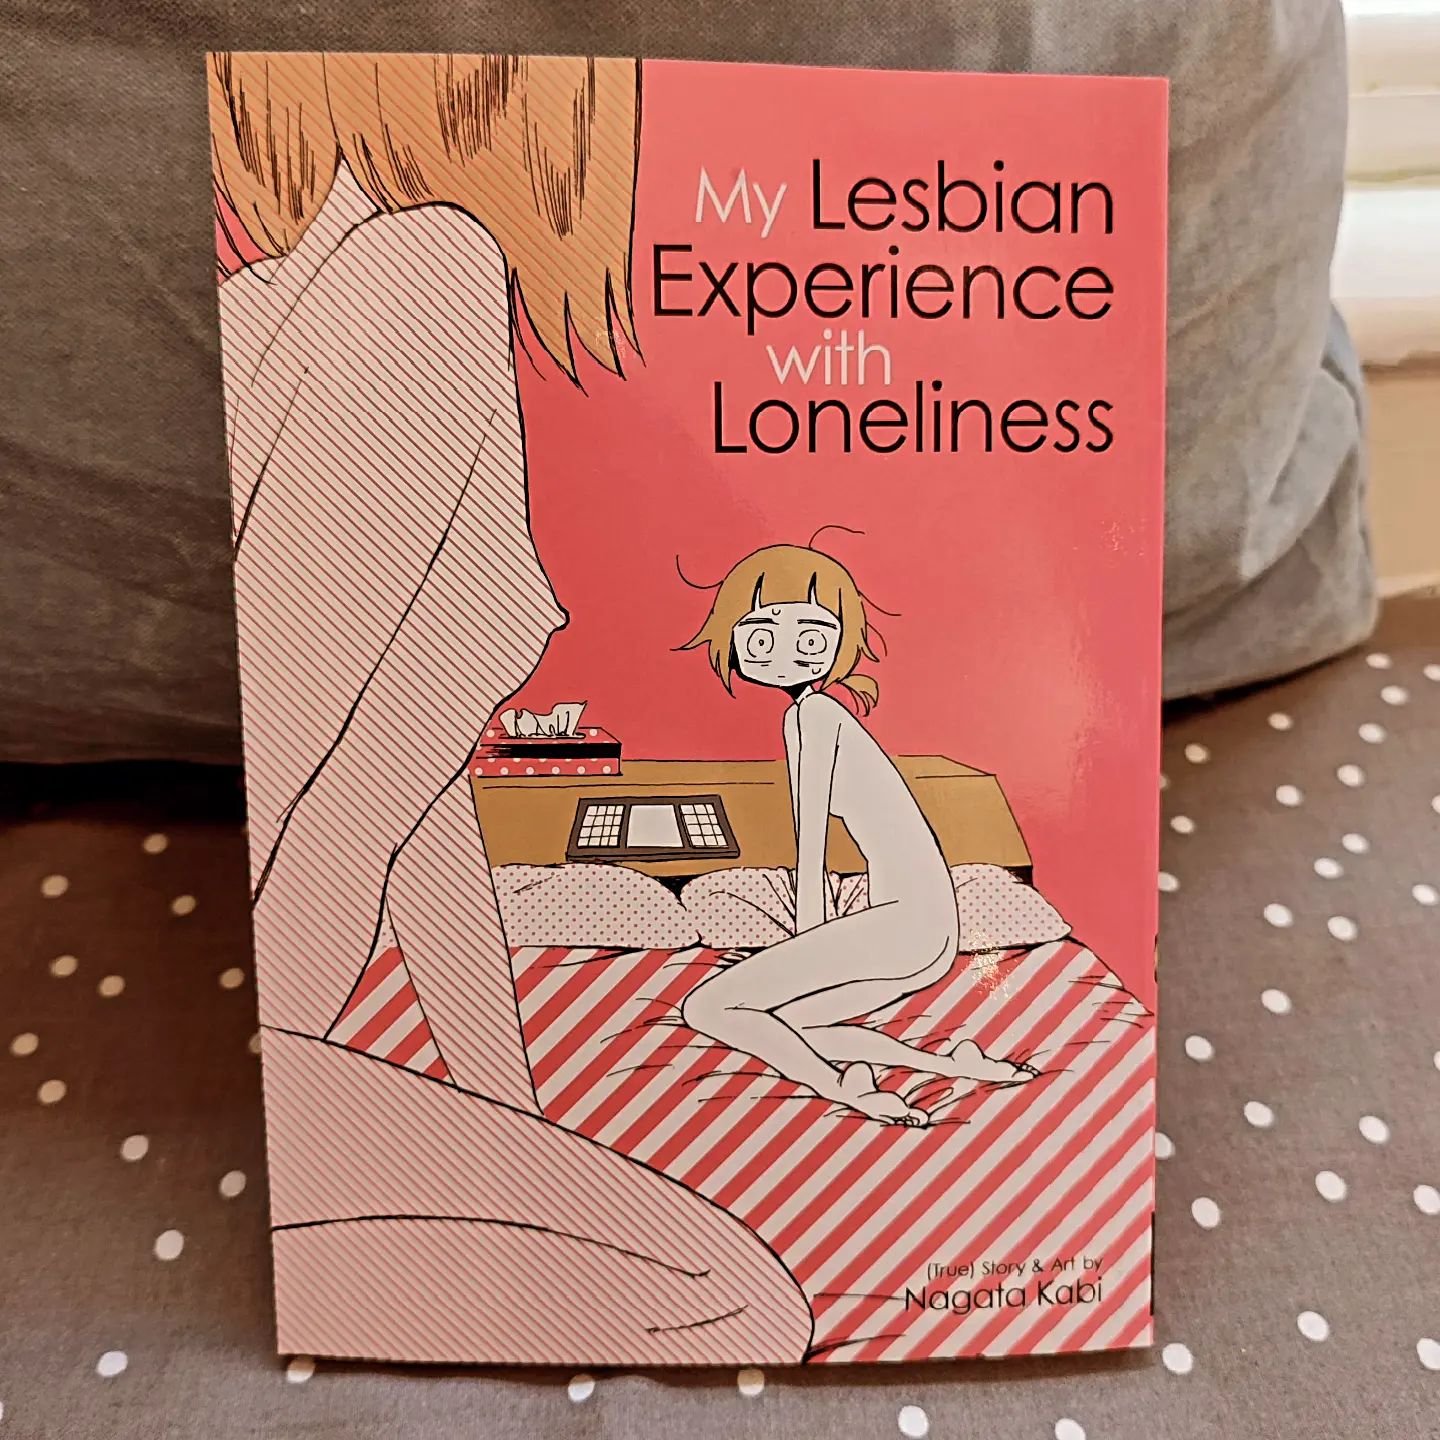 Next queer book group is on 16th June at 2pm and we are reading Nagata Kabi's iconic graphic novel, My Lesbian Experience with Loneliness! Tickets available on website/link in bio.